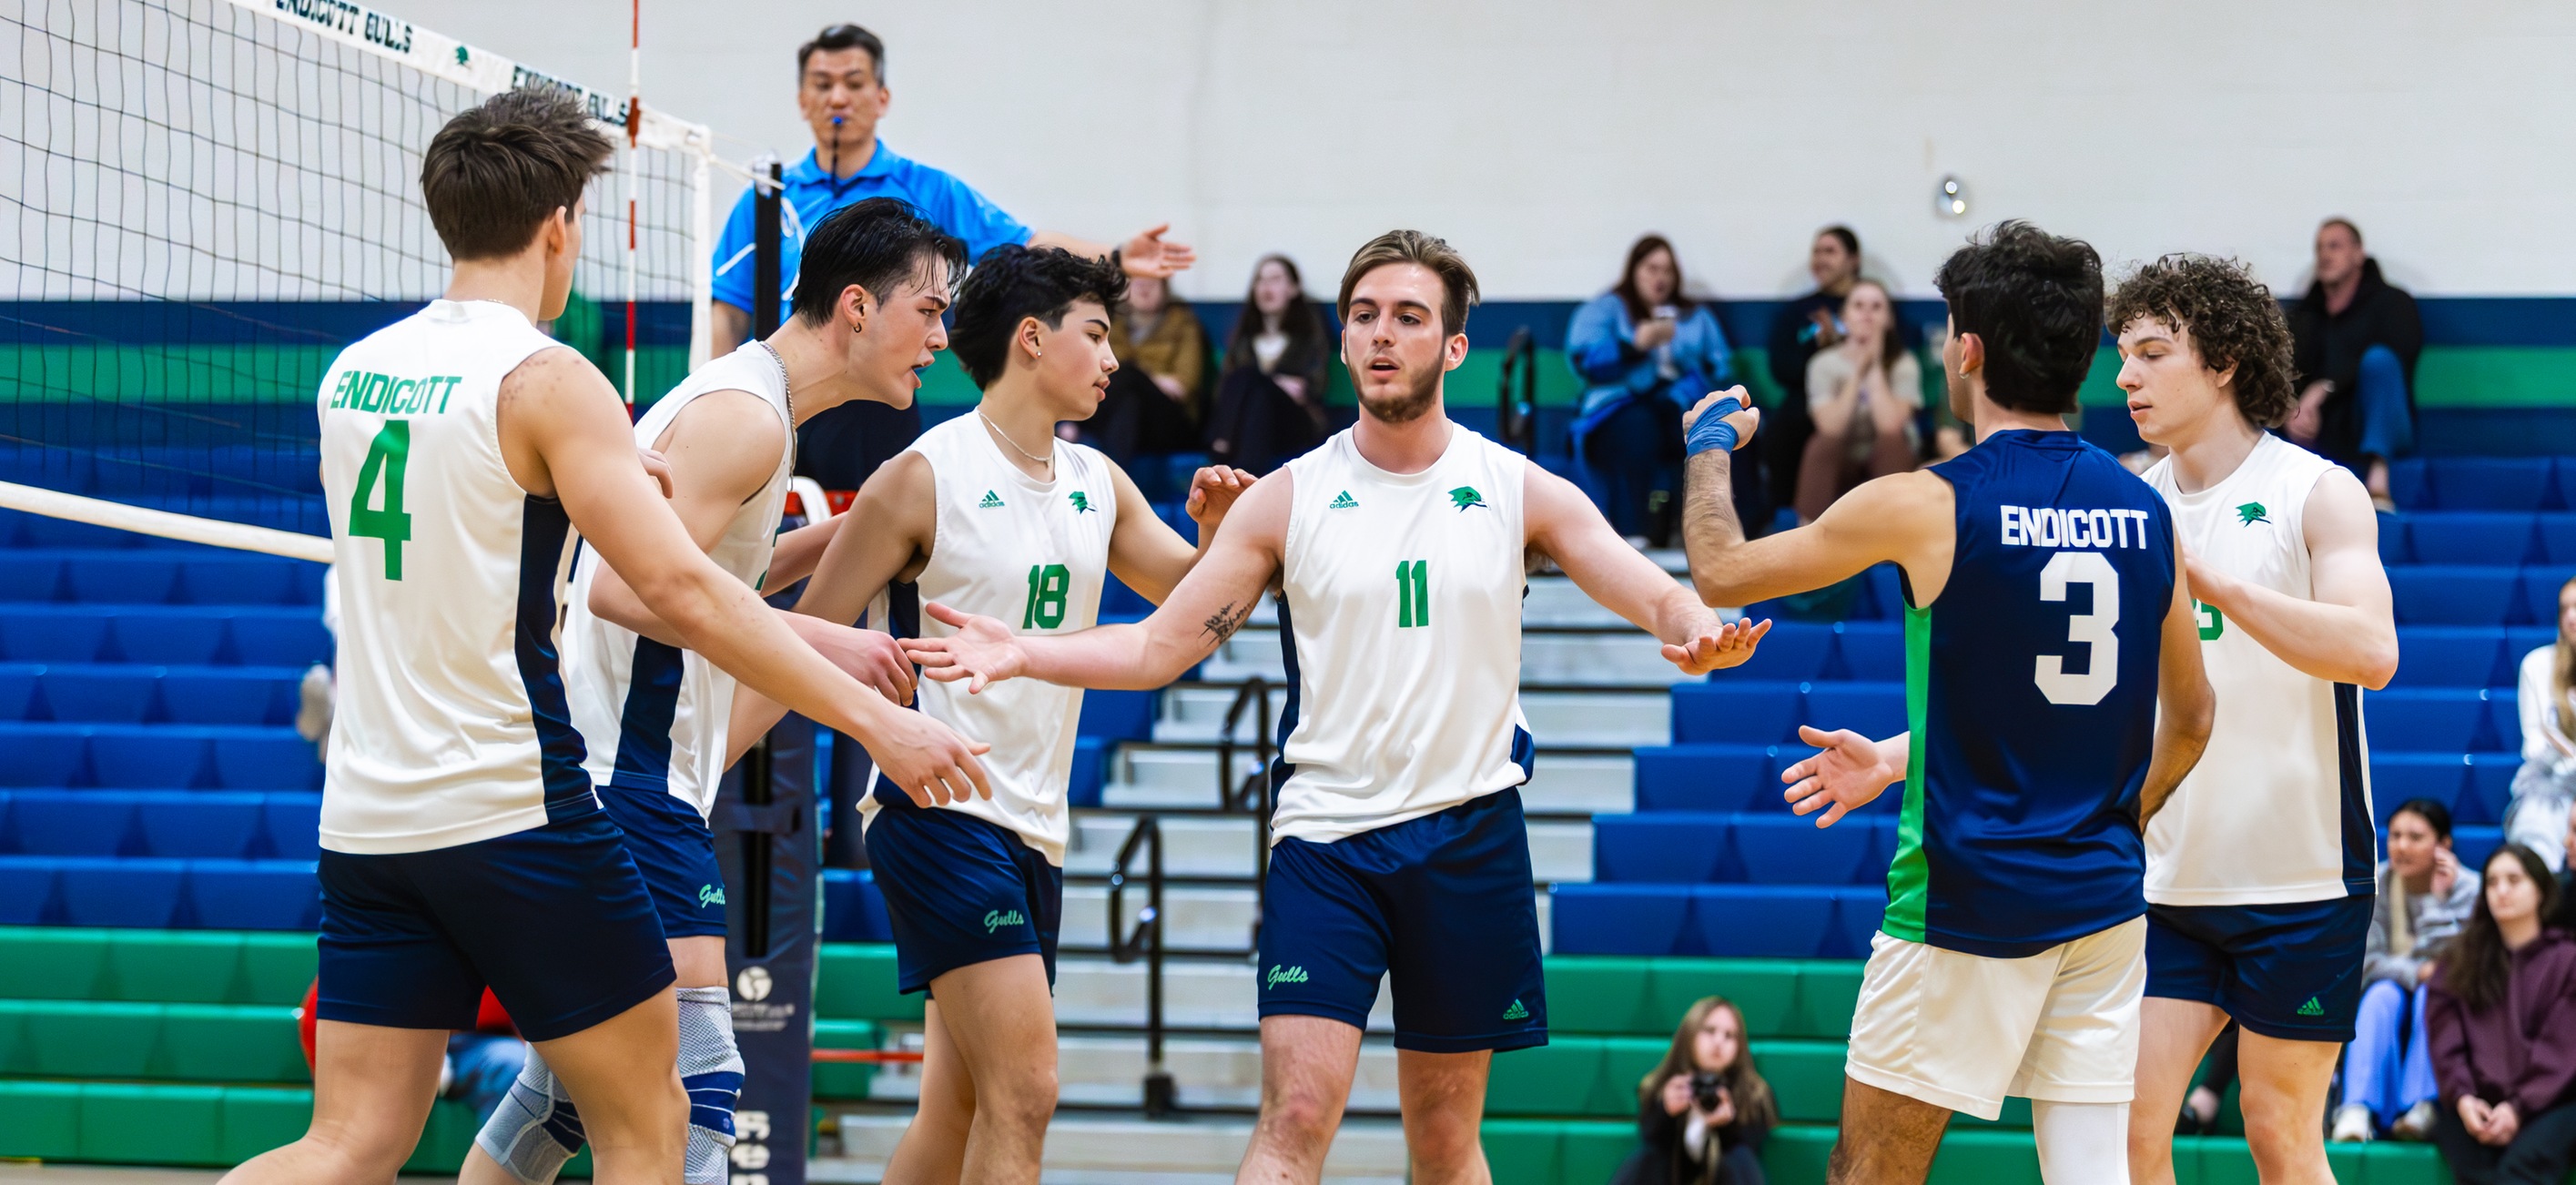 Men’s Volleyball Sweeps Russell Sage In NEVC Quarterfinals, 3-0